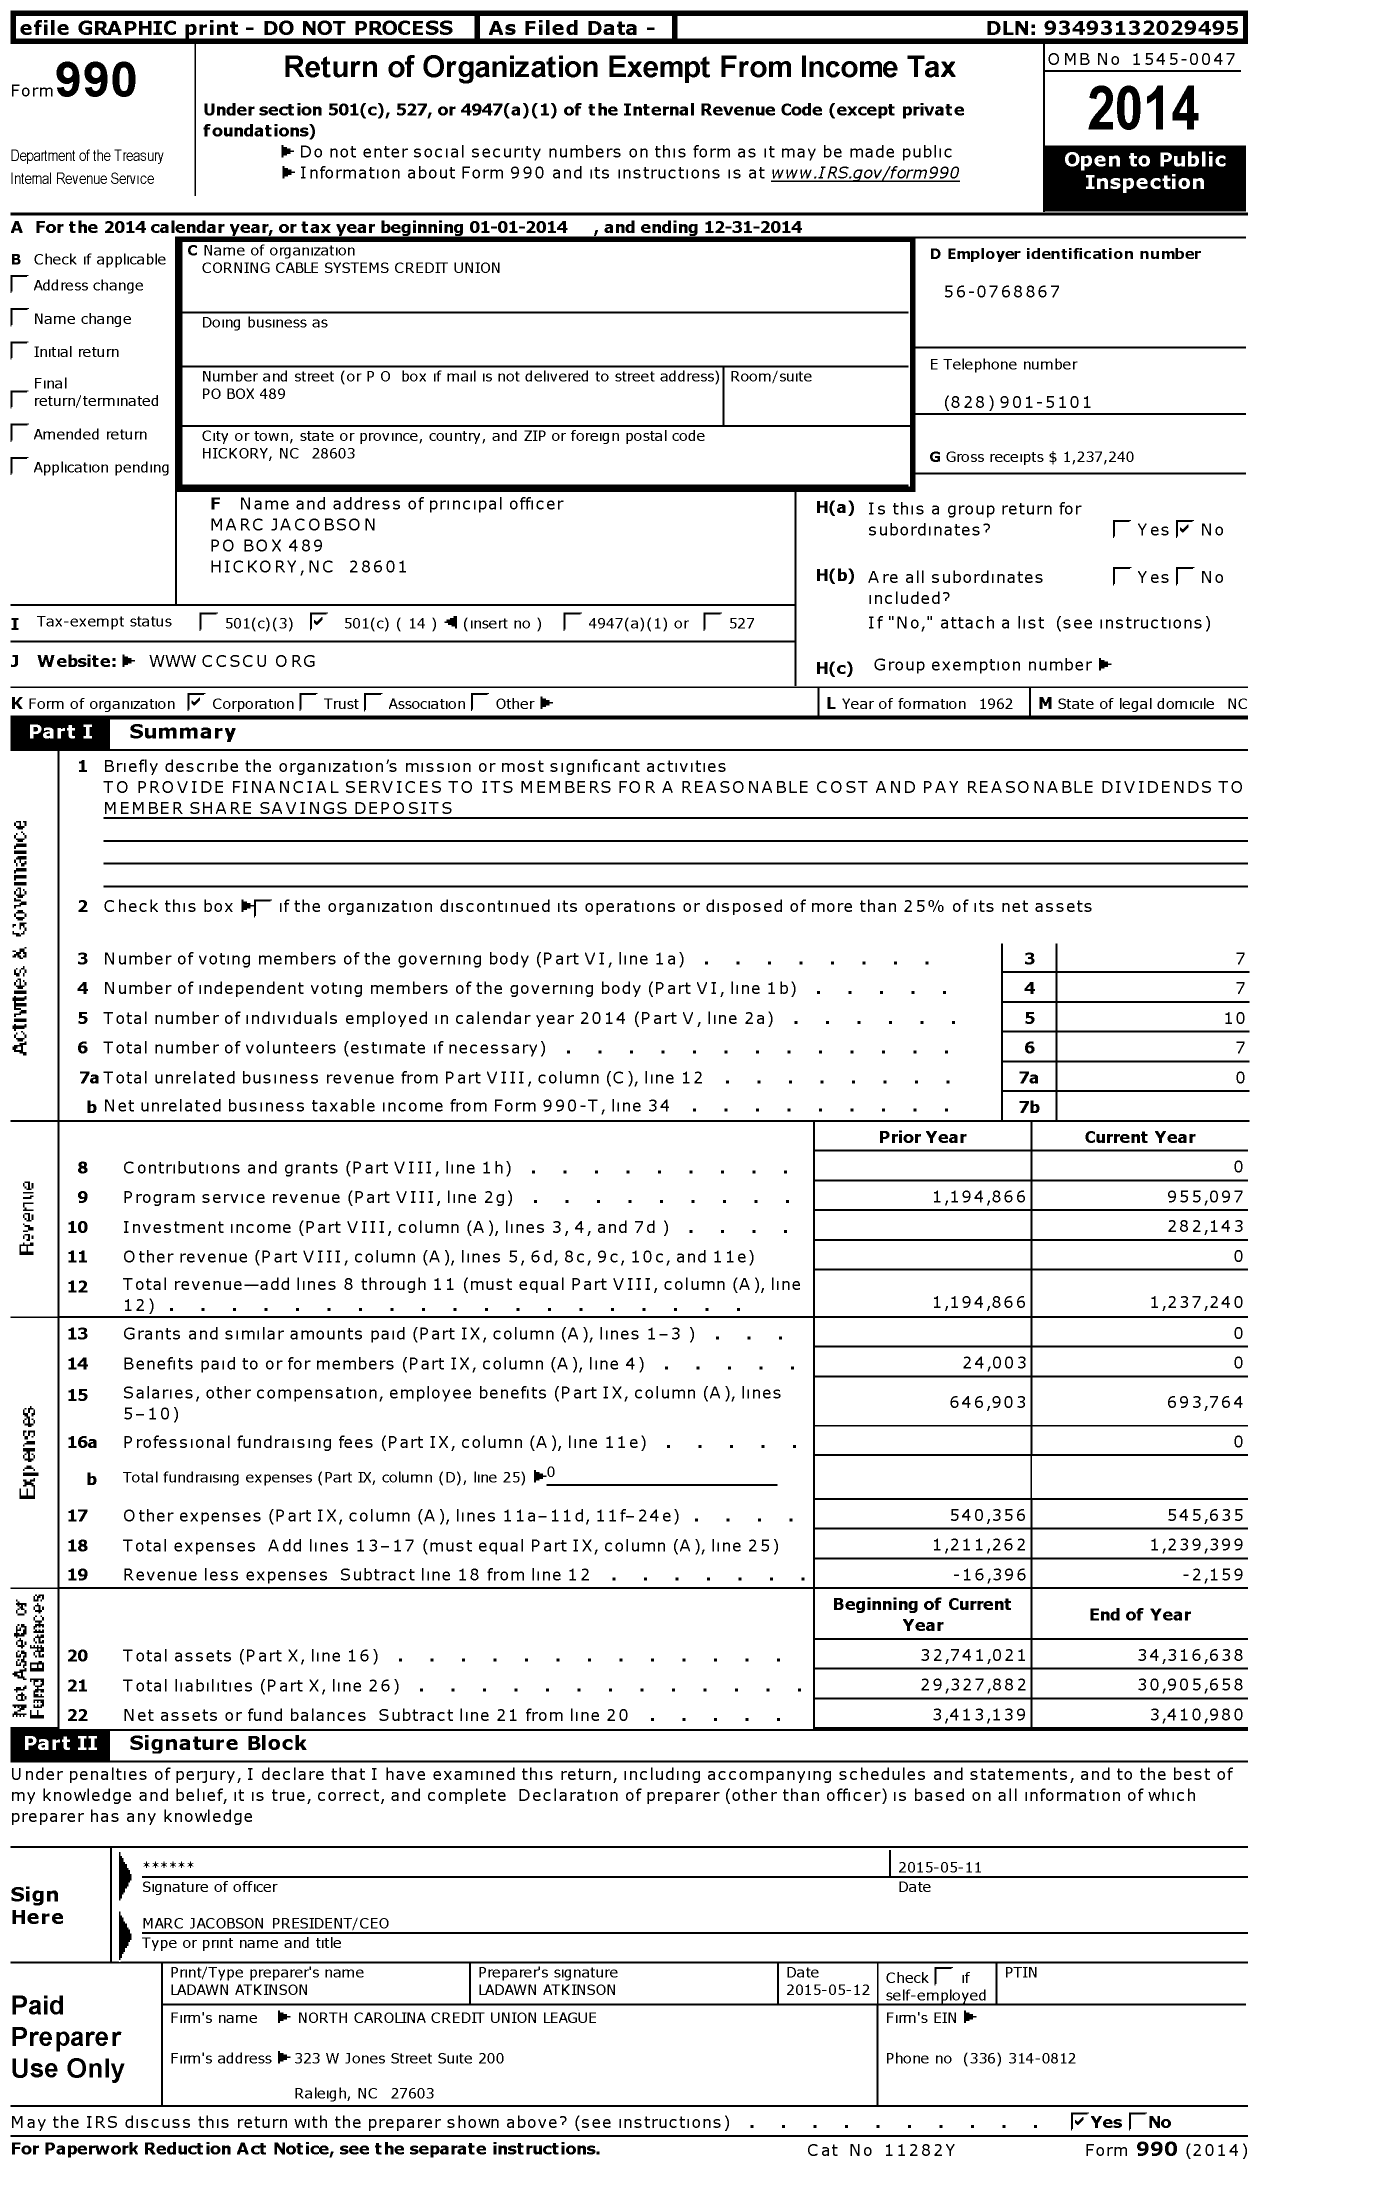 Image of first page of 2014 Form 990O for Corning Cable Systems Credit Union